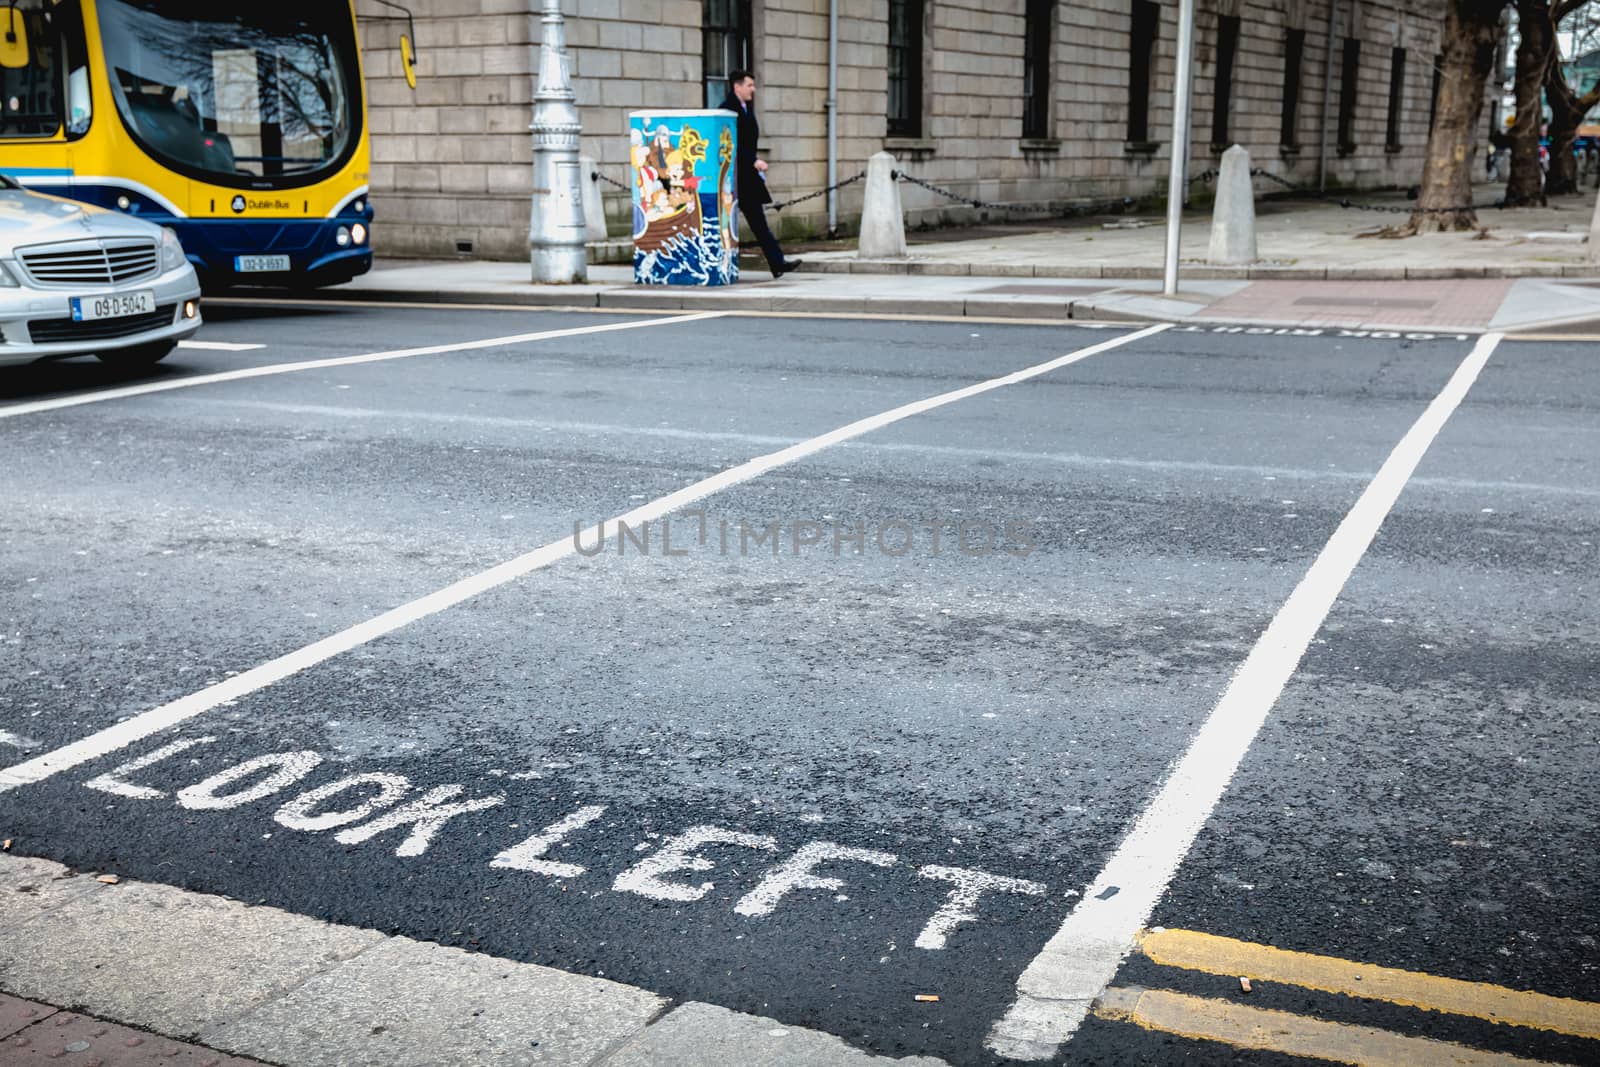 Dublin, Ireland - February 11, 2019: Look Left painted in white on the road on a pedestrian crossing in the city center on a winter day